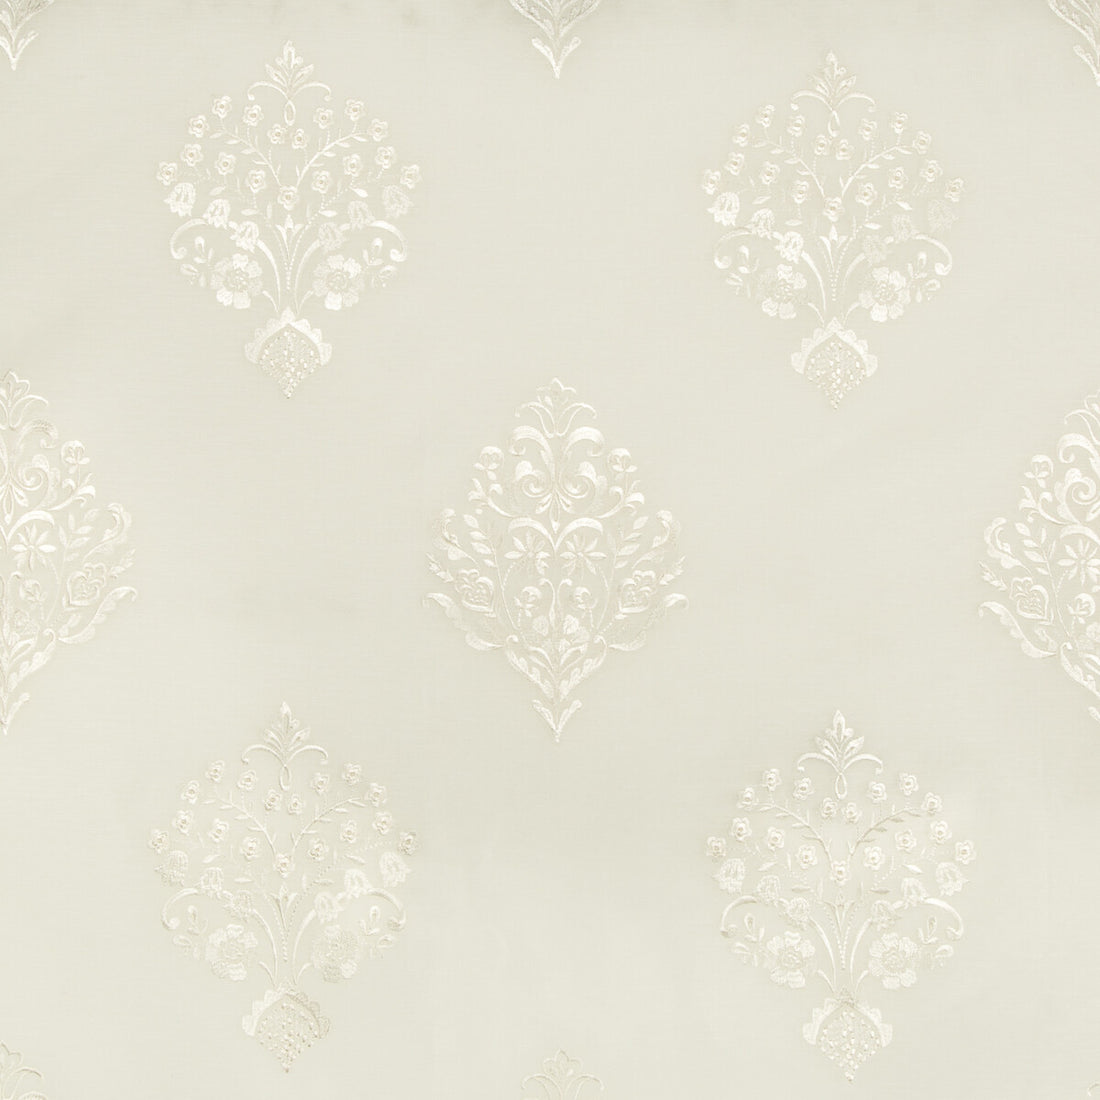 Catulle Sheer fabric in white color - pattern 8017110.101.0 - by Brunschwig &amp; Fils in the Le Parnasse collection